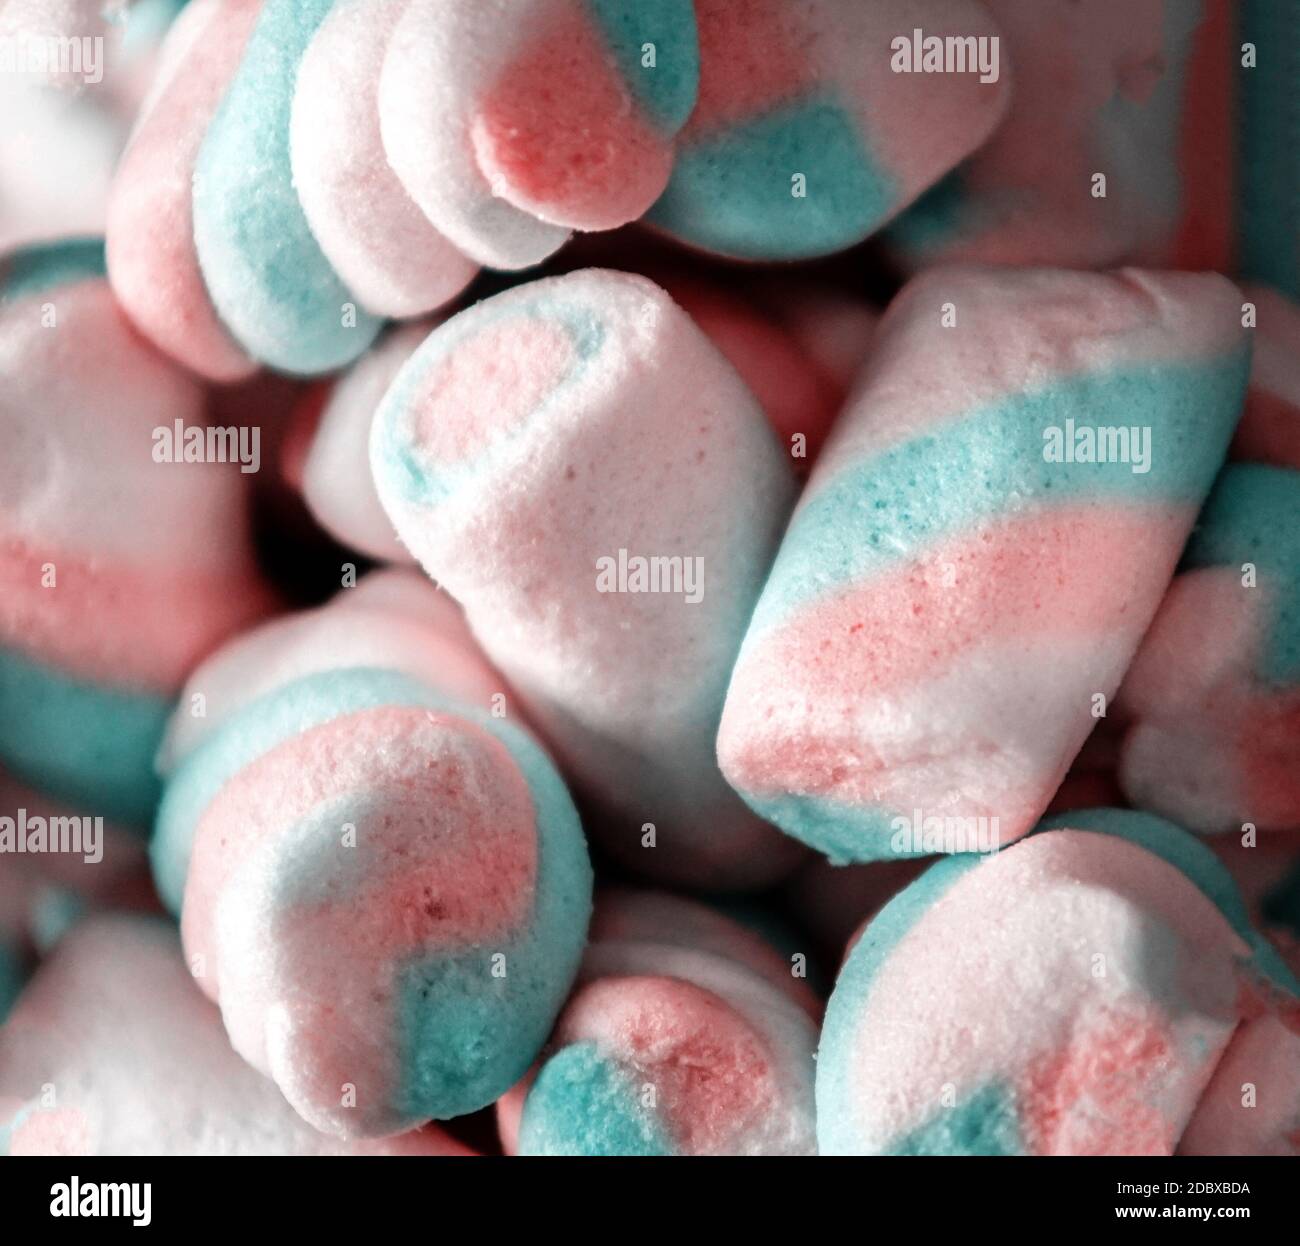 Candy aesthetic. Sugar food photography. Stock Photo